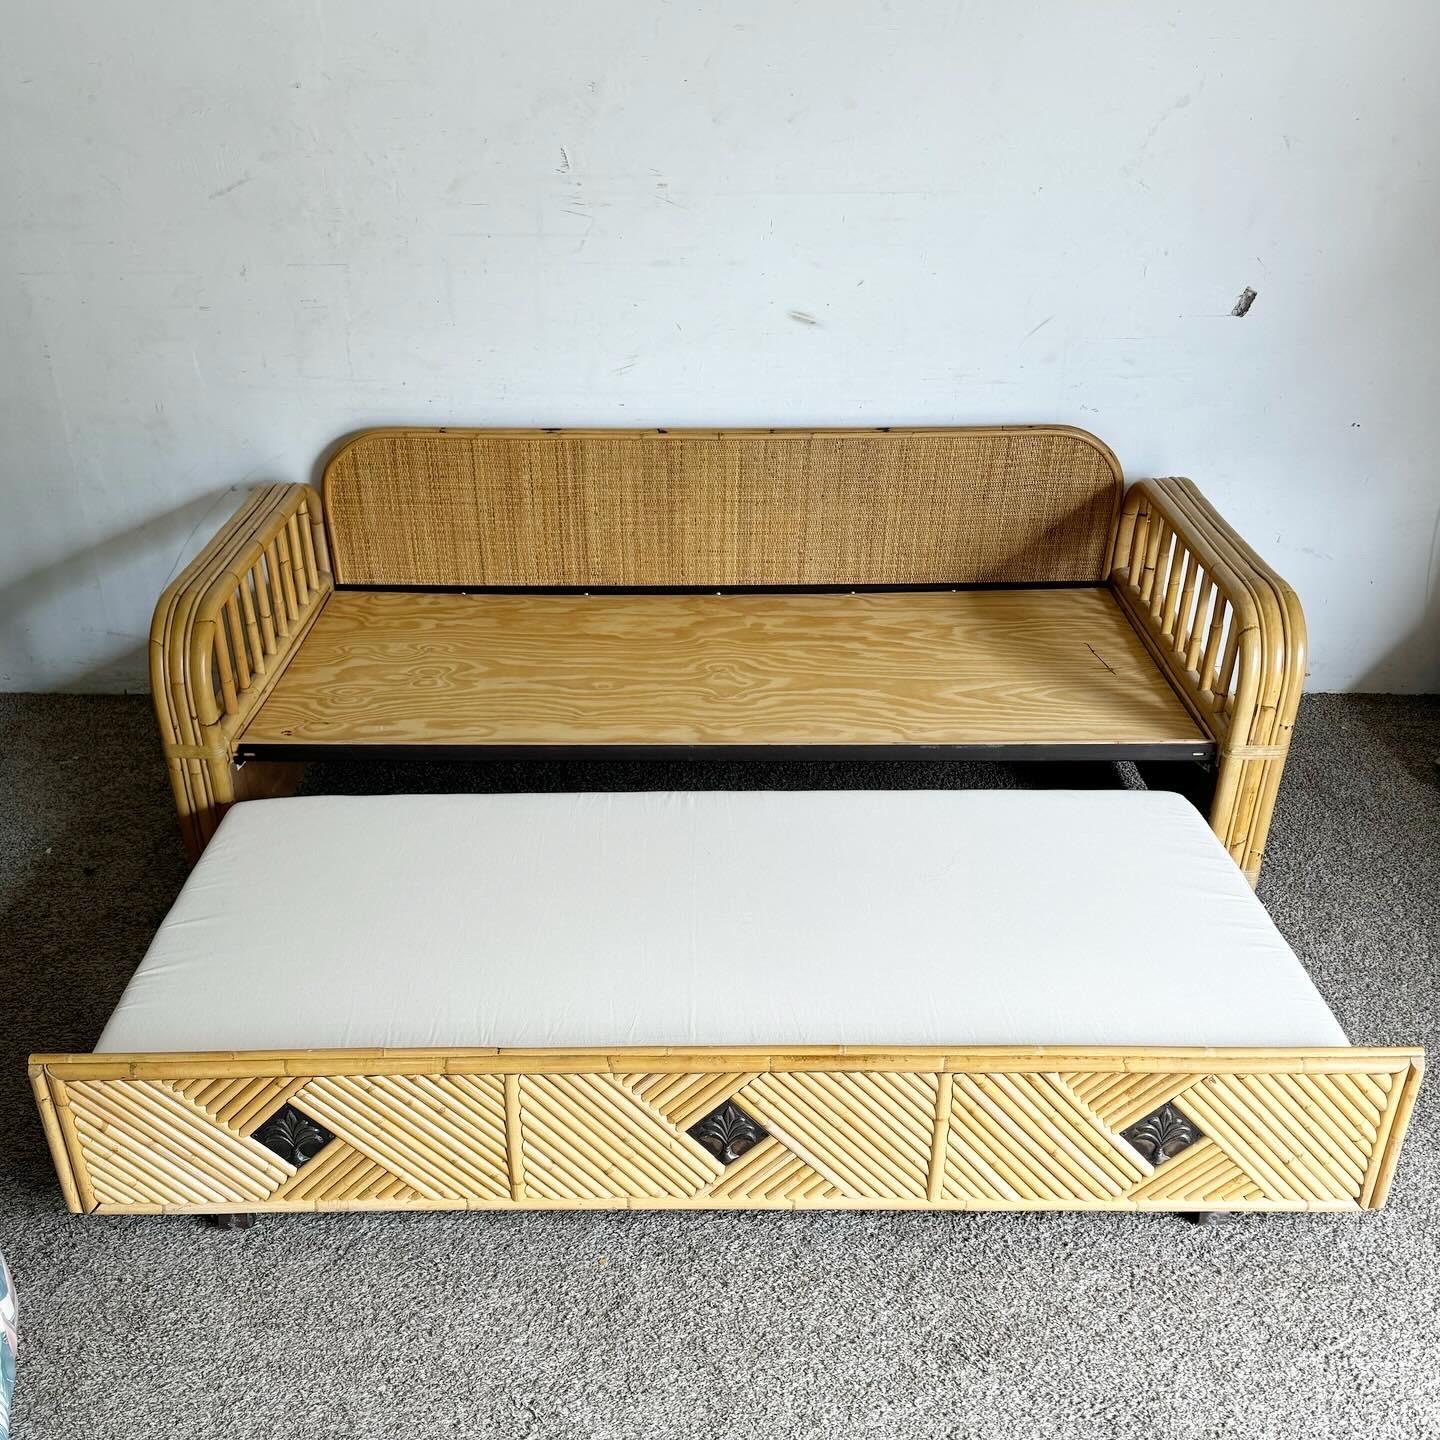 Boho Chic Bamboo Rattan Day Bed With Pull Out Trundle For Sale 4